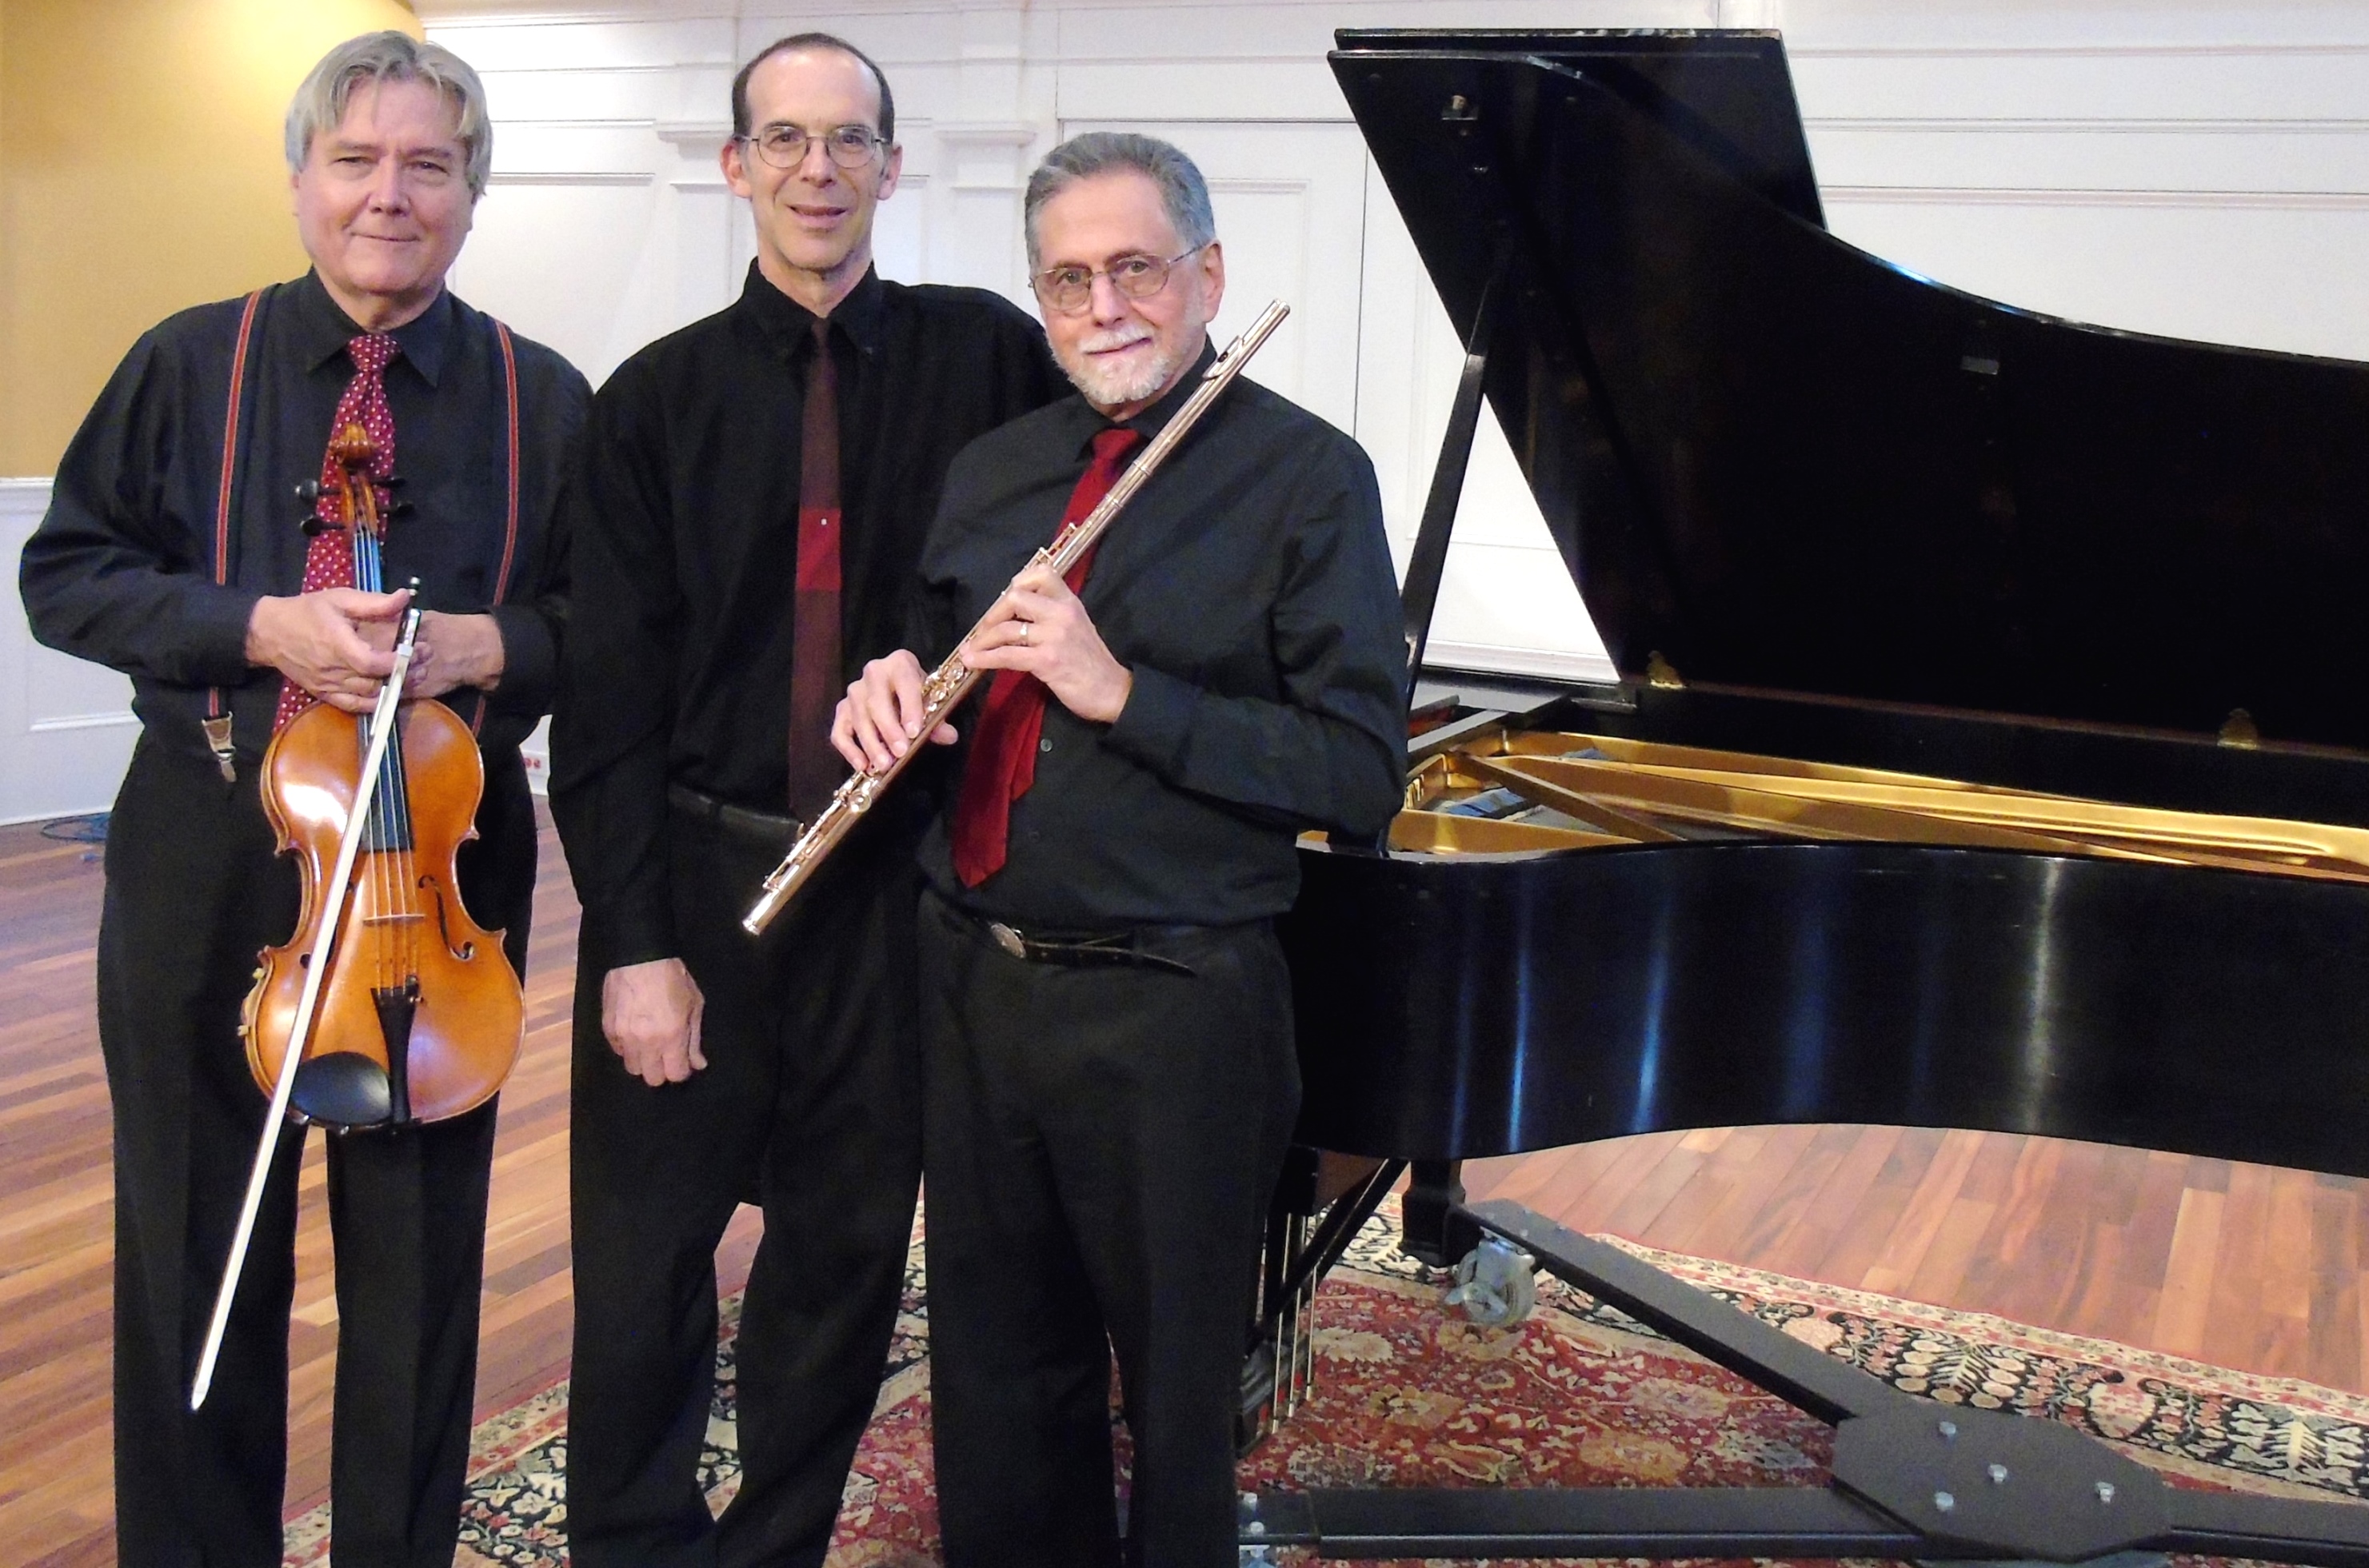 Three men wearing black dress shirts with red ties, the one on the left carries a violin, the one on the right carries a flute. They are all standing in front of a piano. 